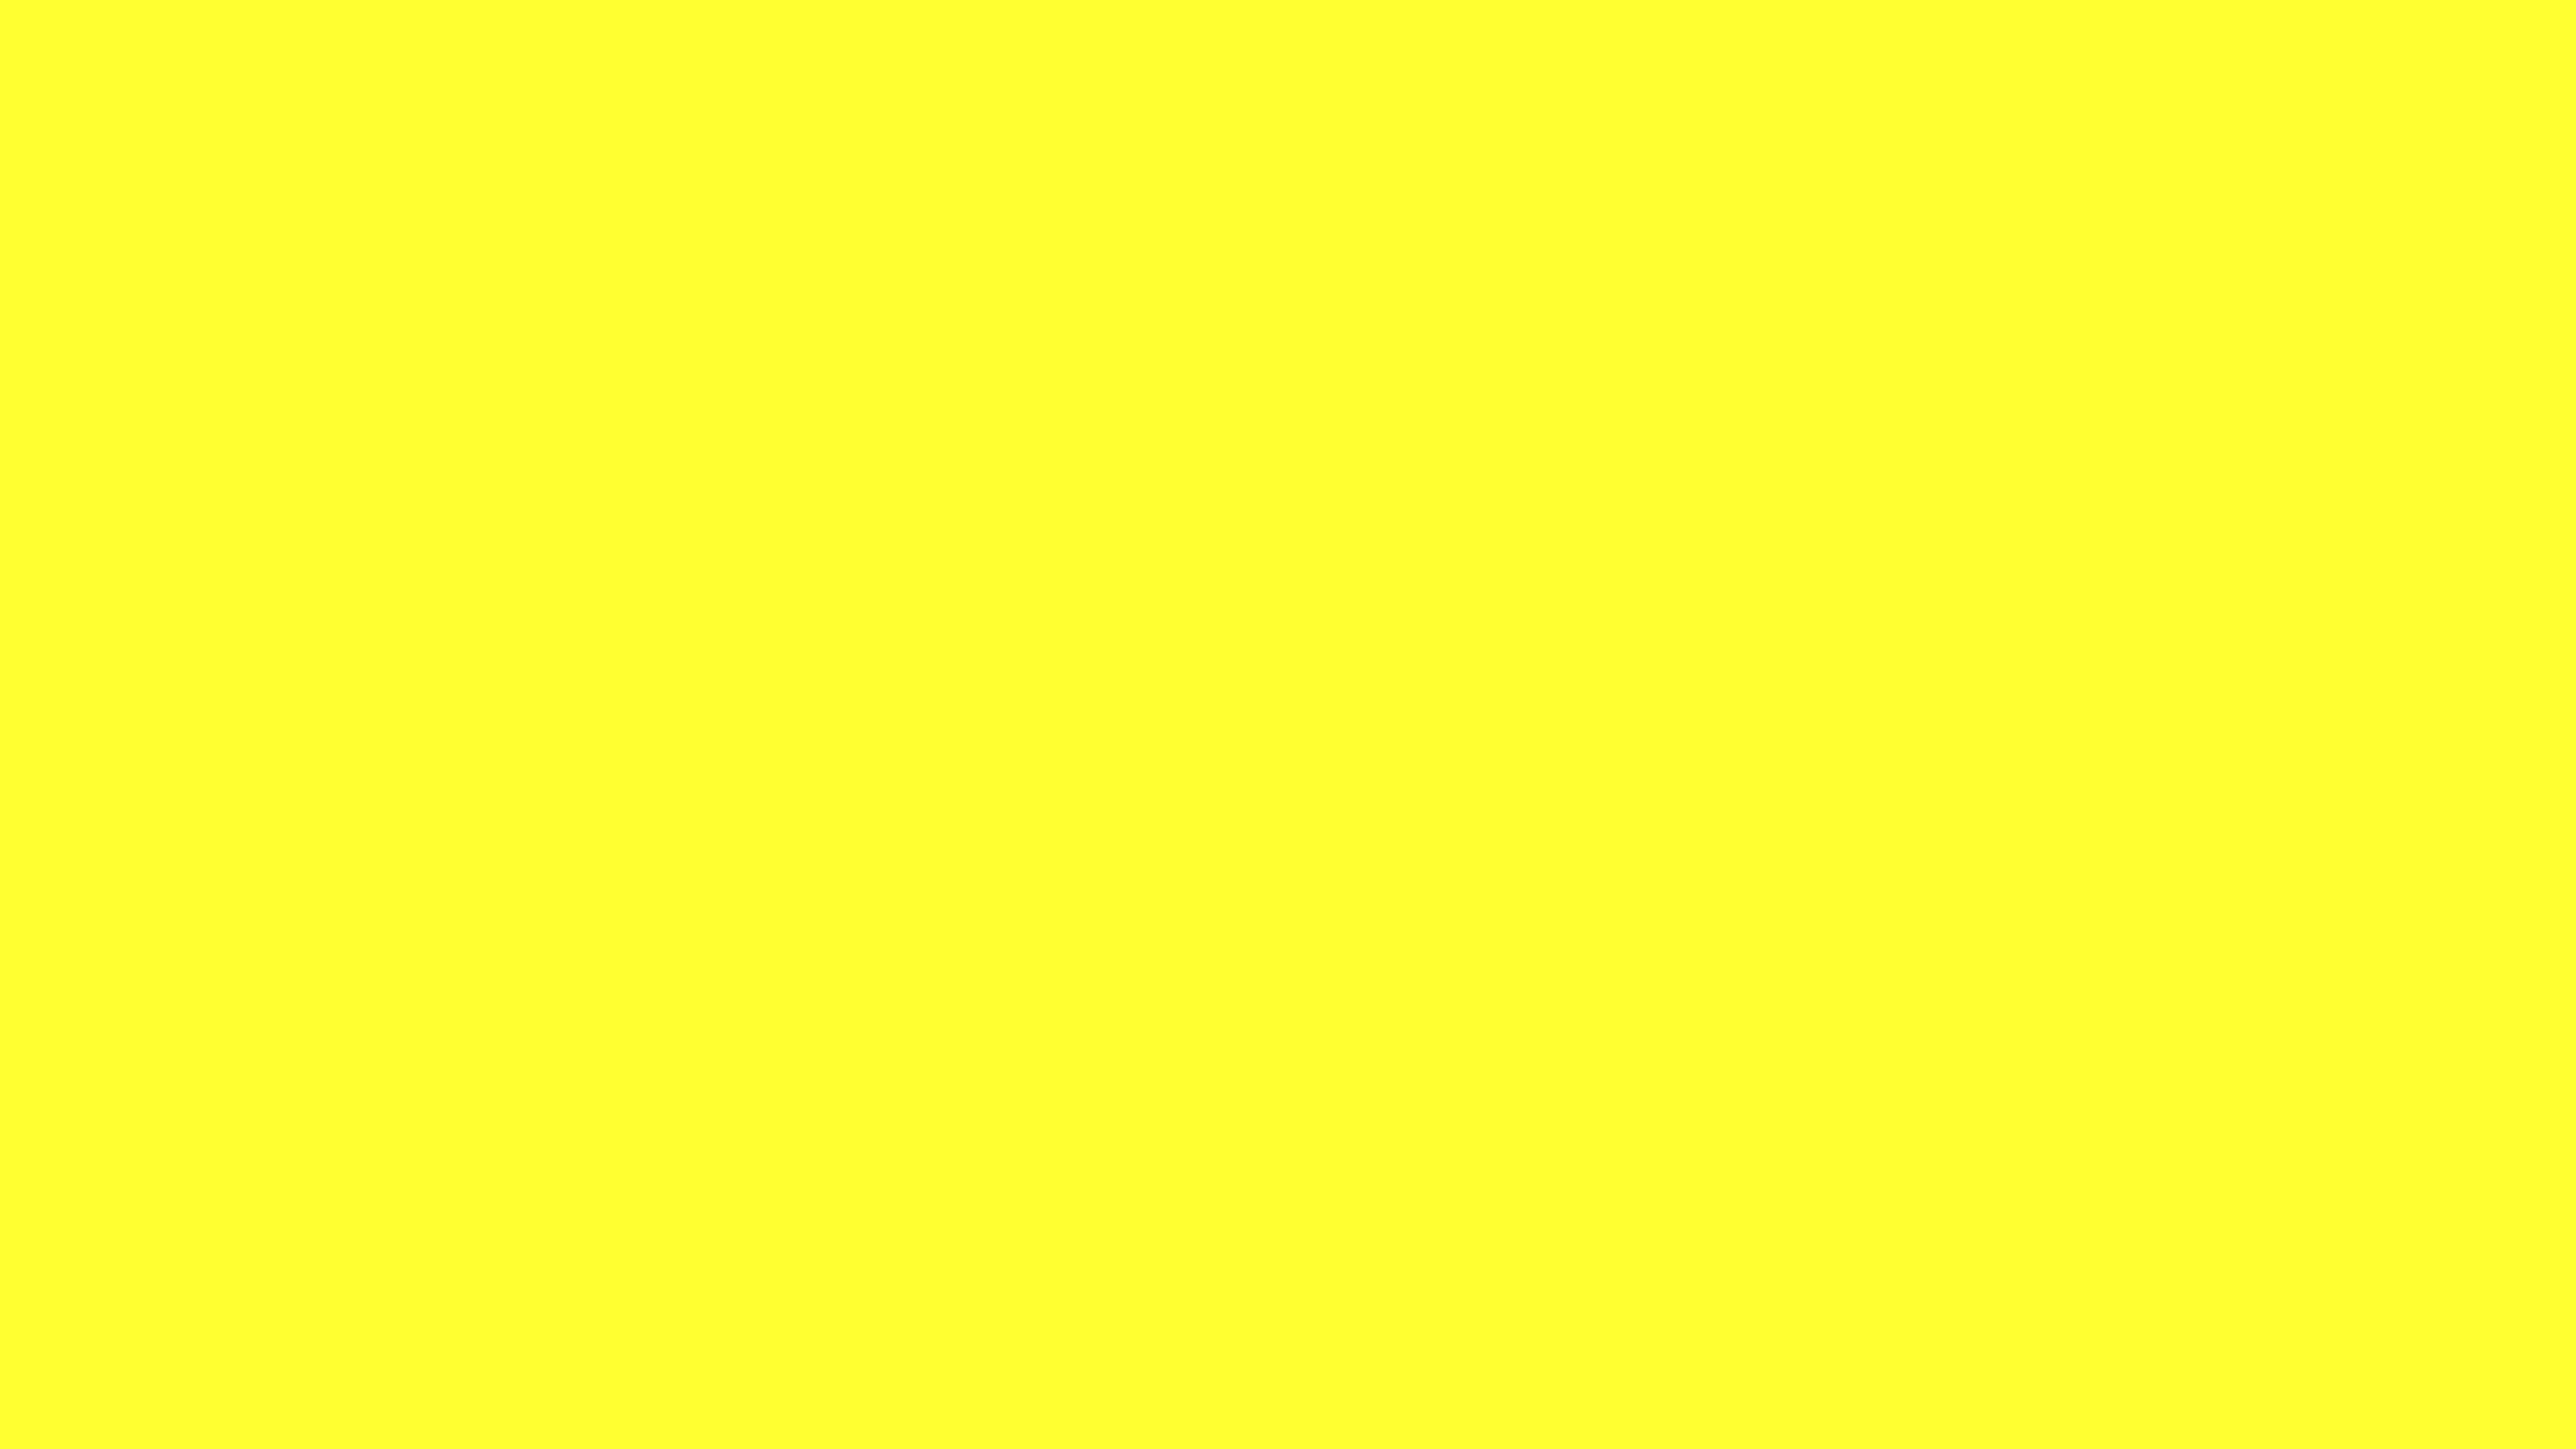 3840x2160 Daffodil Solid Color Background